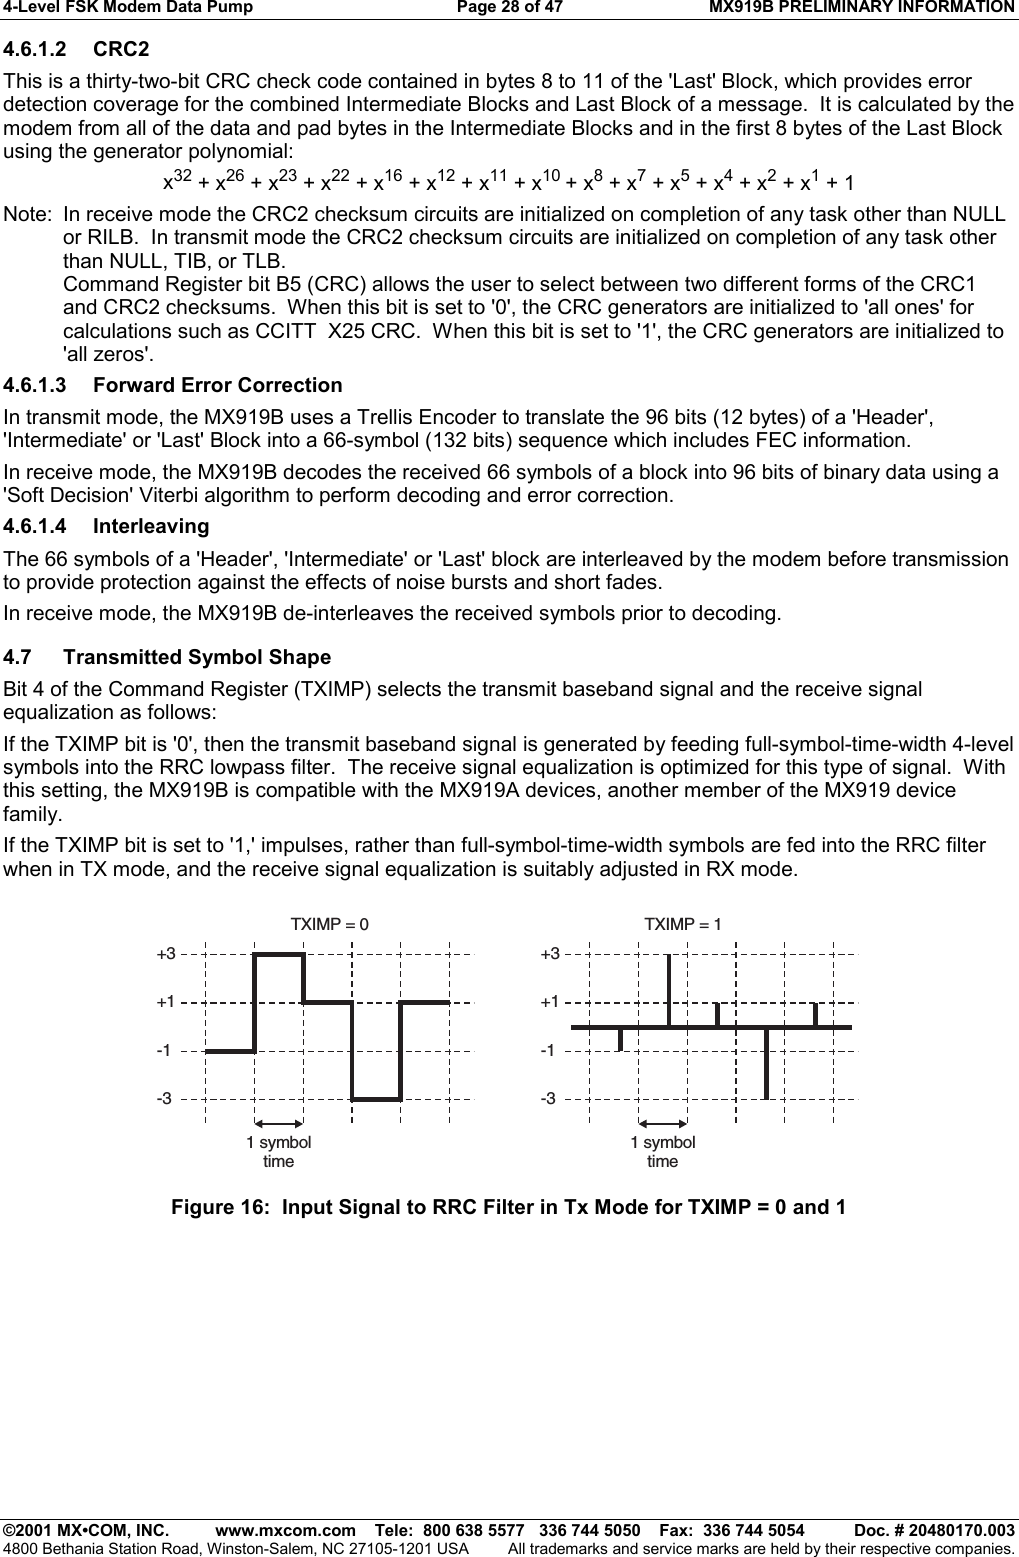 4-Level FSK Modem Data Pump  Page 28 of 47  MX919B PRELIMINARY INFORMATION   ©2001 MX•COM, INC.  www.mxcom.com    Tele:  800 638 5577   336 744 5050    Fax:  336 744 5054  Doc. # 20480170.003 4800 Bethania Station Road, Winston-Salem, NC 27105-1201 USA  All trademarks and service marks are held by their respective companies. 4.6.1.2 CRC2 This is a thirty-two-bit CRC check code contained in bytes 8 to 11 of the &apos;Last&apos; Block, which provides error detection coverage for the combined Intermediate Blocks and Last Block of a message.  It is calculated by the modem from all of the data and pad bytes in the Intermediate Blocks and in the first 8 bytes of the Last Block using the generator polynomial: x32 + x26 + x23 + x22 + x16 + x12 + x11 + x10 + x8 + x7 + x5 + x4 + x2 + x1 + 1 Note:  In receive mode the CRC2 checksum circuits are initialized on completion of any task other than NULL or RILB.  In transmit mode the CRC2 checksum circuits are initialized on completion of any task other than NULL, TIB, or TLB. Command Register bit B5 (CRC) allows the user to select between two different forms of the CRC1 and CRC2 checksums.  When this bit is set to &apos;0&apos;, the CRC generators are initialized to &apos;all ones&apos; for calculations such as CCITT  X25 CRC.  When this bit is set to &apos;1&apos;, the CRC generators are initialized to &apos;all zeros&apos;. 4.6.1.3  Forward Error Correction In transmit mode, the MX919B uses a Trellis Encoder to translate the 96 bits (12 bytes) of a &apos;Header&apos;,  &apos;Intermediate&apos; or &apos;Last&apos; Block into a 66-symbol (132 bits) sequence which includes FEC information. In receive mode, the MX919B decodes the received 66 symbols of a block into 96 bits of binary data using a &apos;Soft Decision&apos; Viterbi algorithm to perform decoding and error correction. 4.6.1.4 Interleaving The 66 symbols of a &apos;Header&apos;, &apos;Intermediate&apos; or &apos;Last&apos; block are interleaved by the modem before transmission to provide protection against the effects of noise bursts and short fades.  In receive mode, the MX919B de-interleaves the received symbols prior to decoding. 4.7 Transmitted Symbol Shape Bit 4 of the Command Register (TXIMP) selects the transmit baseband signal and the receive signal equalization as follows: If the TXIMP bit is &apos;0&apos;, then the transmit baseband signal is generated by feeding full-symbol-time-width 4-level symbols into the RRC lowpass filter.  The receive signal equalization is optimized for this type of signal.  With this setting, the MX919B is compatible with the MX919A devices, another member of the MX919 device family. If the TXIMP bit is set to &apos;1,&apos; impulses, rather than full-symbol-time-width symbols are fed into the RRC filter when in TX mode, and the receive signal equalization is suitably adjusted in RX mode. 1 symboltime+3TXIMP = 0 TXIMP = 1-1+1-31 symboltime+3-1+1-3 Figure 16:  Input Signal to RRC Filter in Tx Mode for TXIMP = 0 and 1 